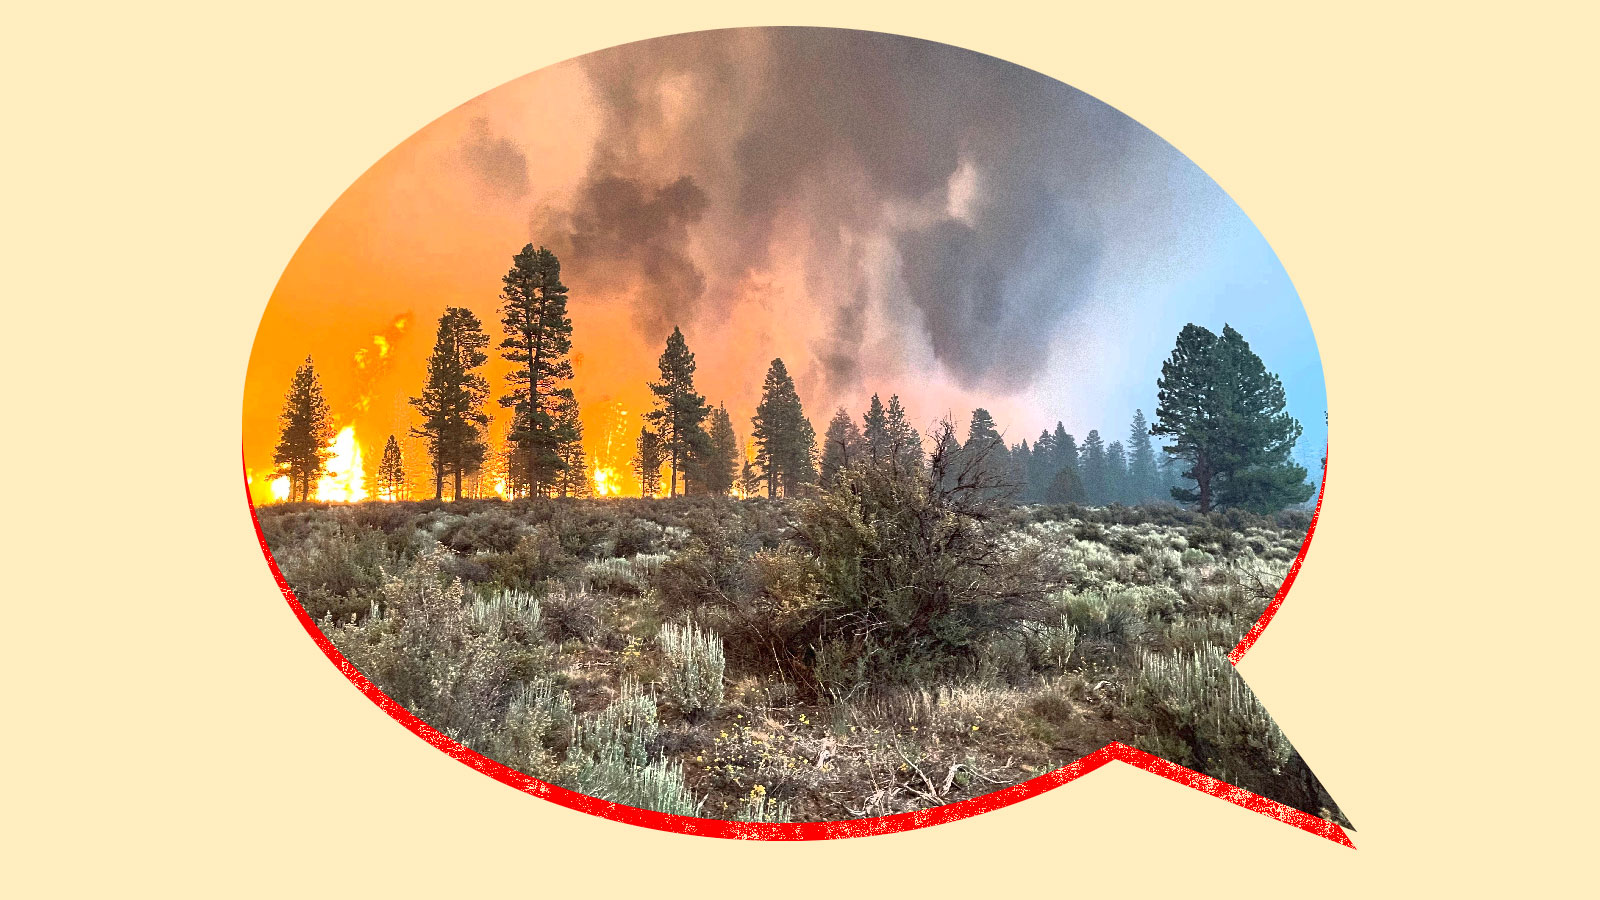 Collage: photo of a wildfire inside of a speech bubble